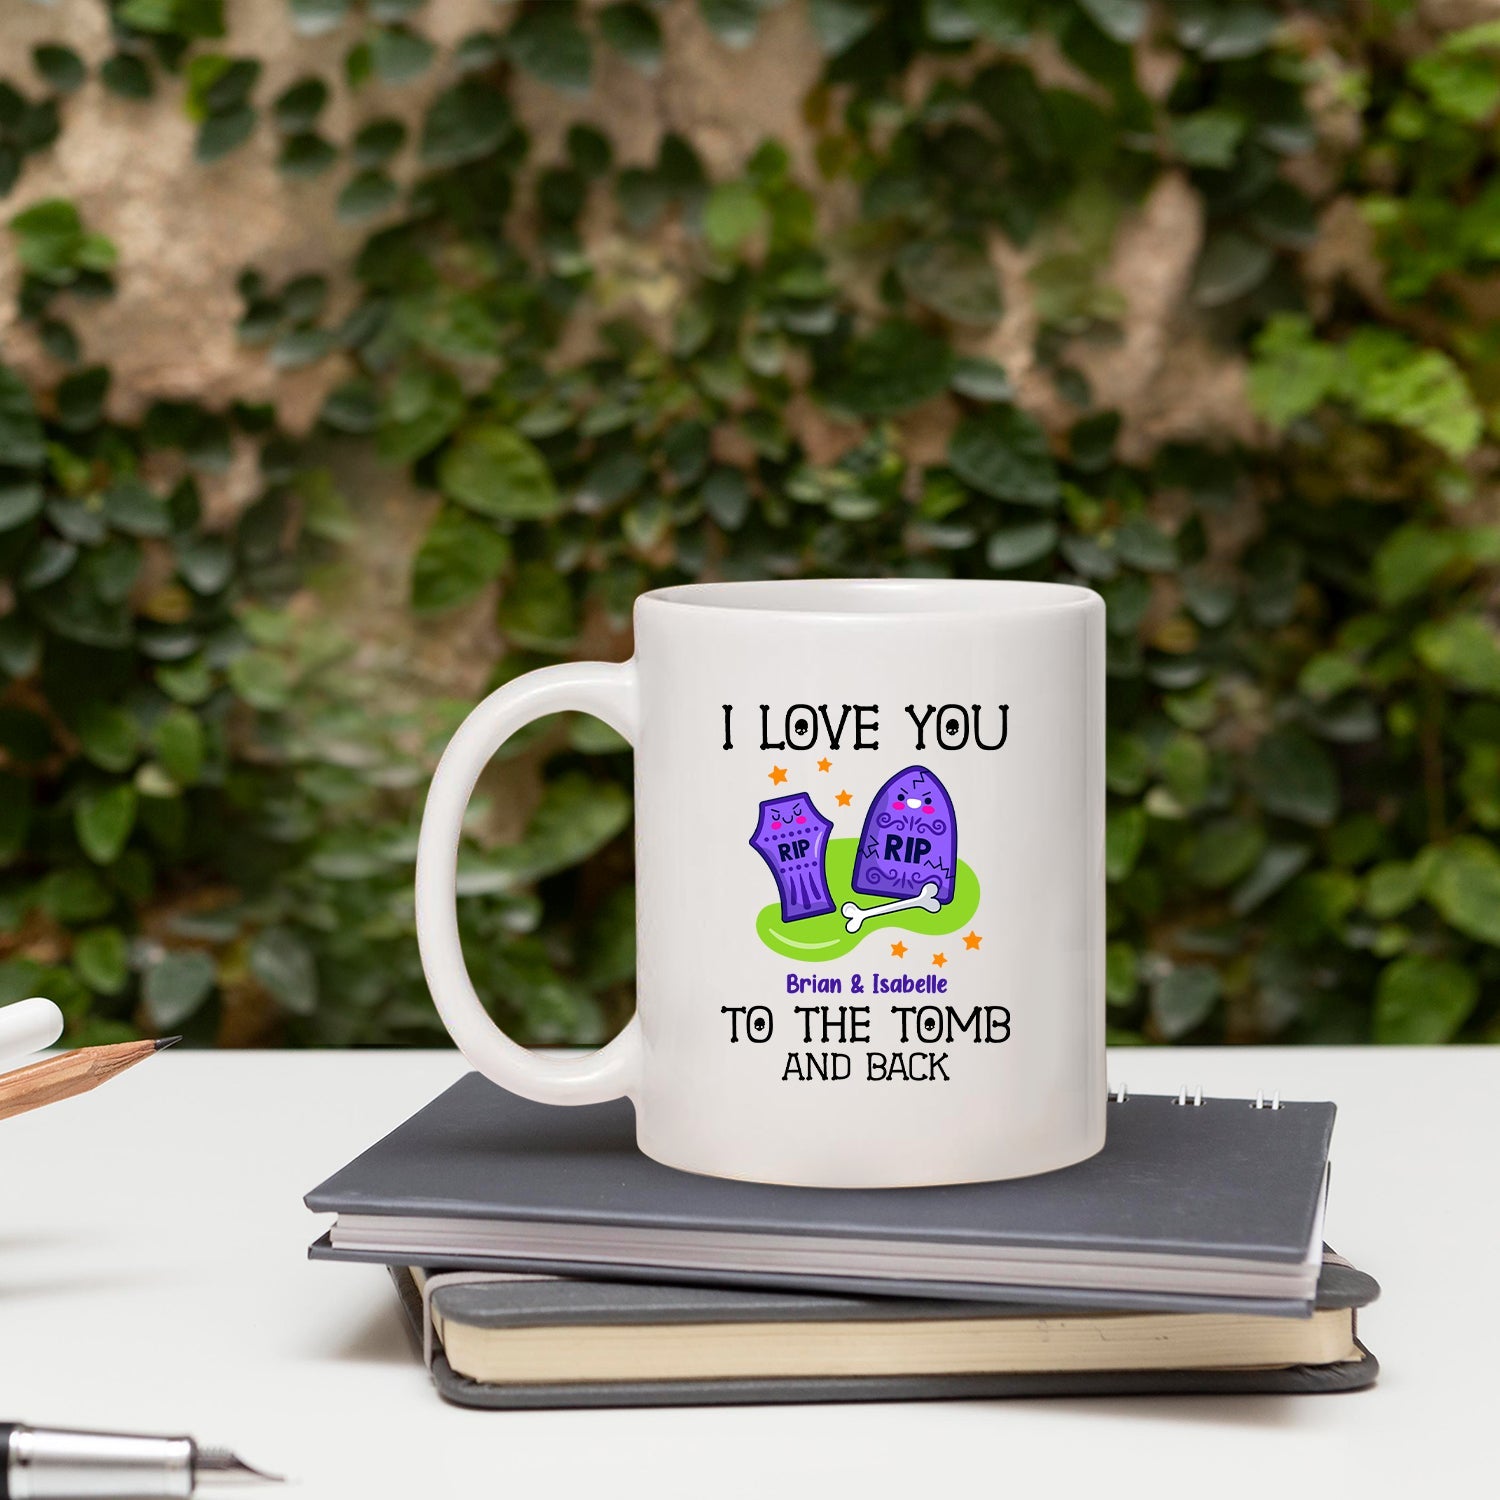 Love You To The Tomb And Back - Personalized Anniversary or Halloween gift for Boyfriend or Girlfriend - Custom Mug - MyMindfulGifts